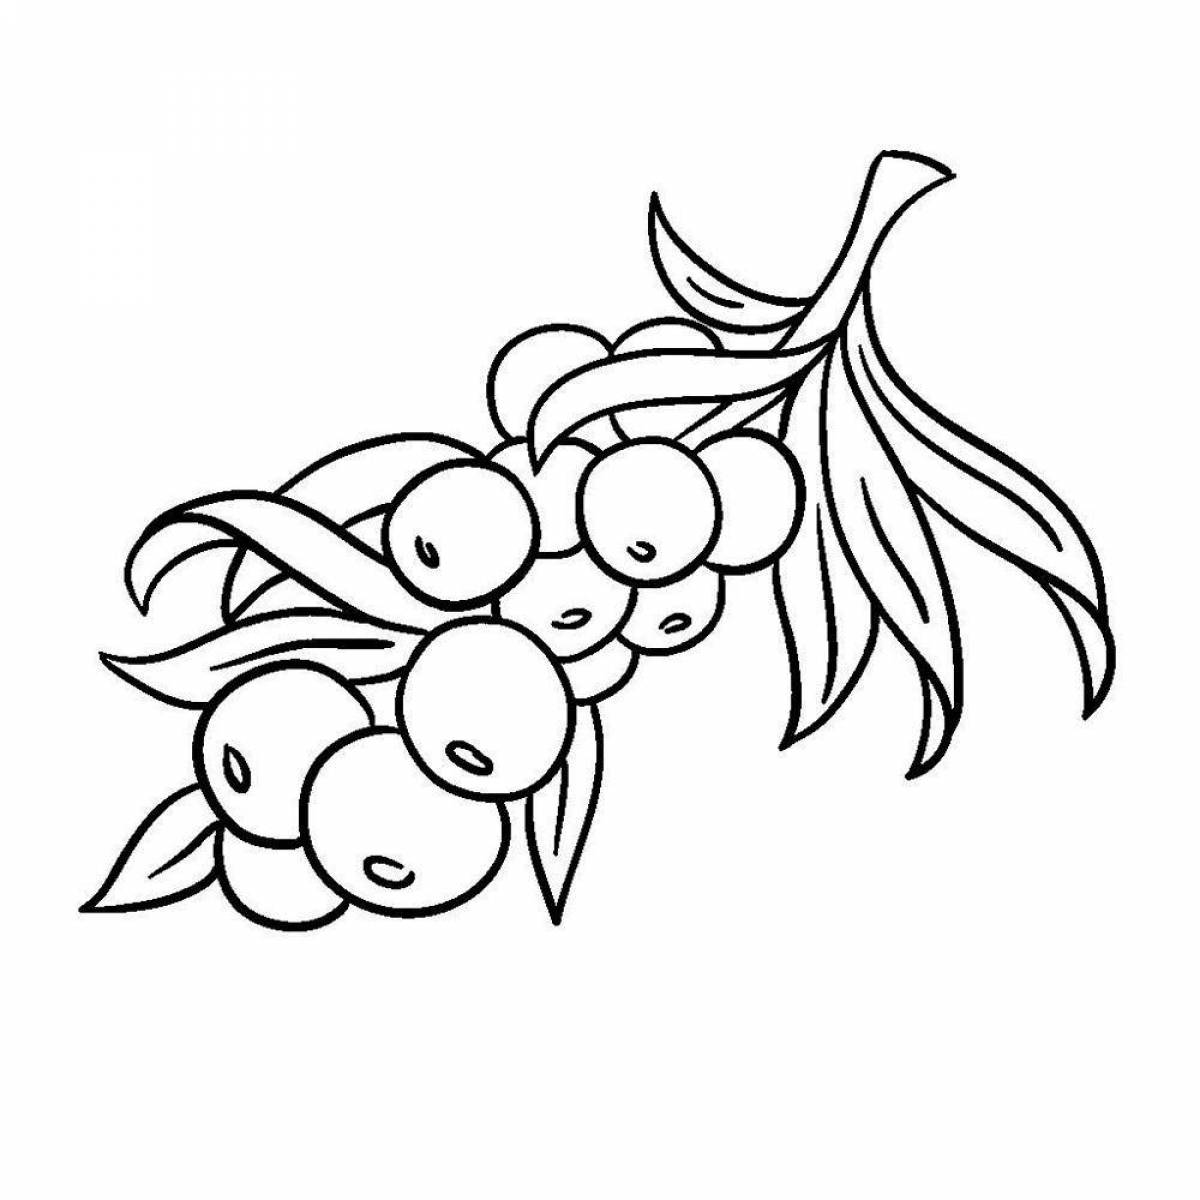 Playful sea buckthorn coloring page